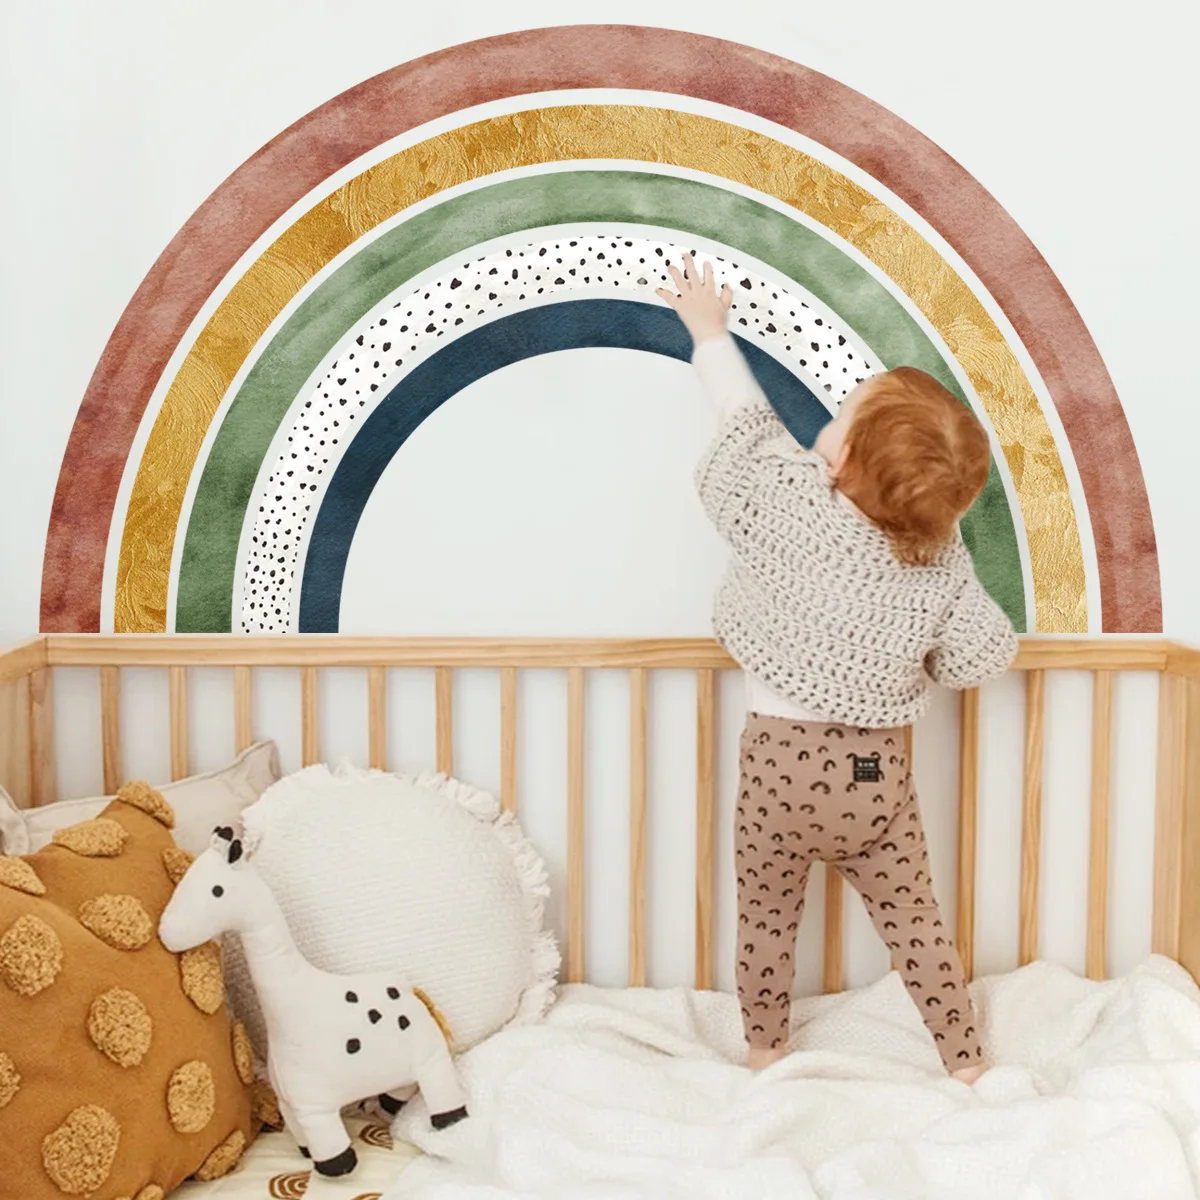 39.5*170cm Large Rainbow Wall Stickers Living Room Background Wall Children's Room Decorative Wall Stickers Wallpaper Bm4052 170cm baby water mat children s mat summer beach inflatable spray water cushion outdoor lawn baby play mat